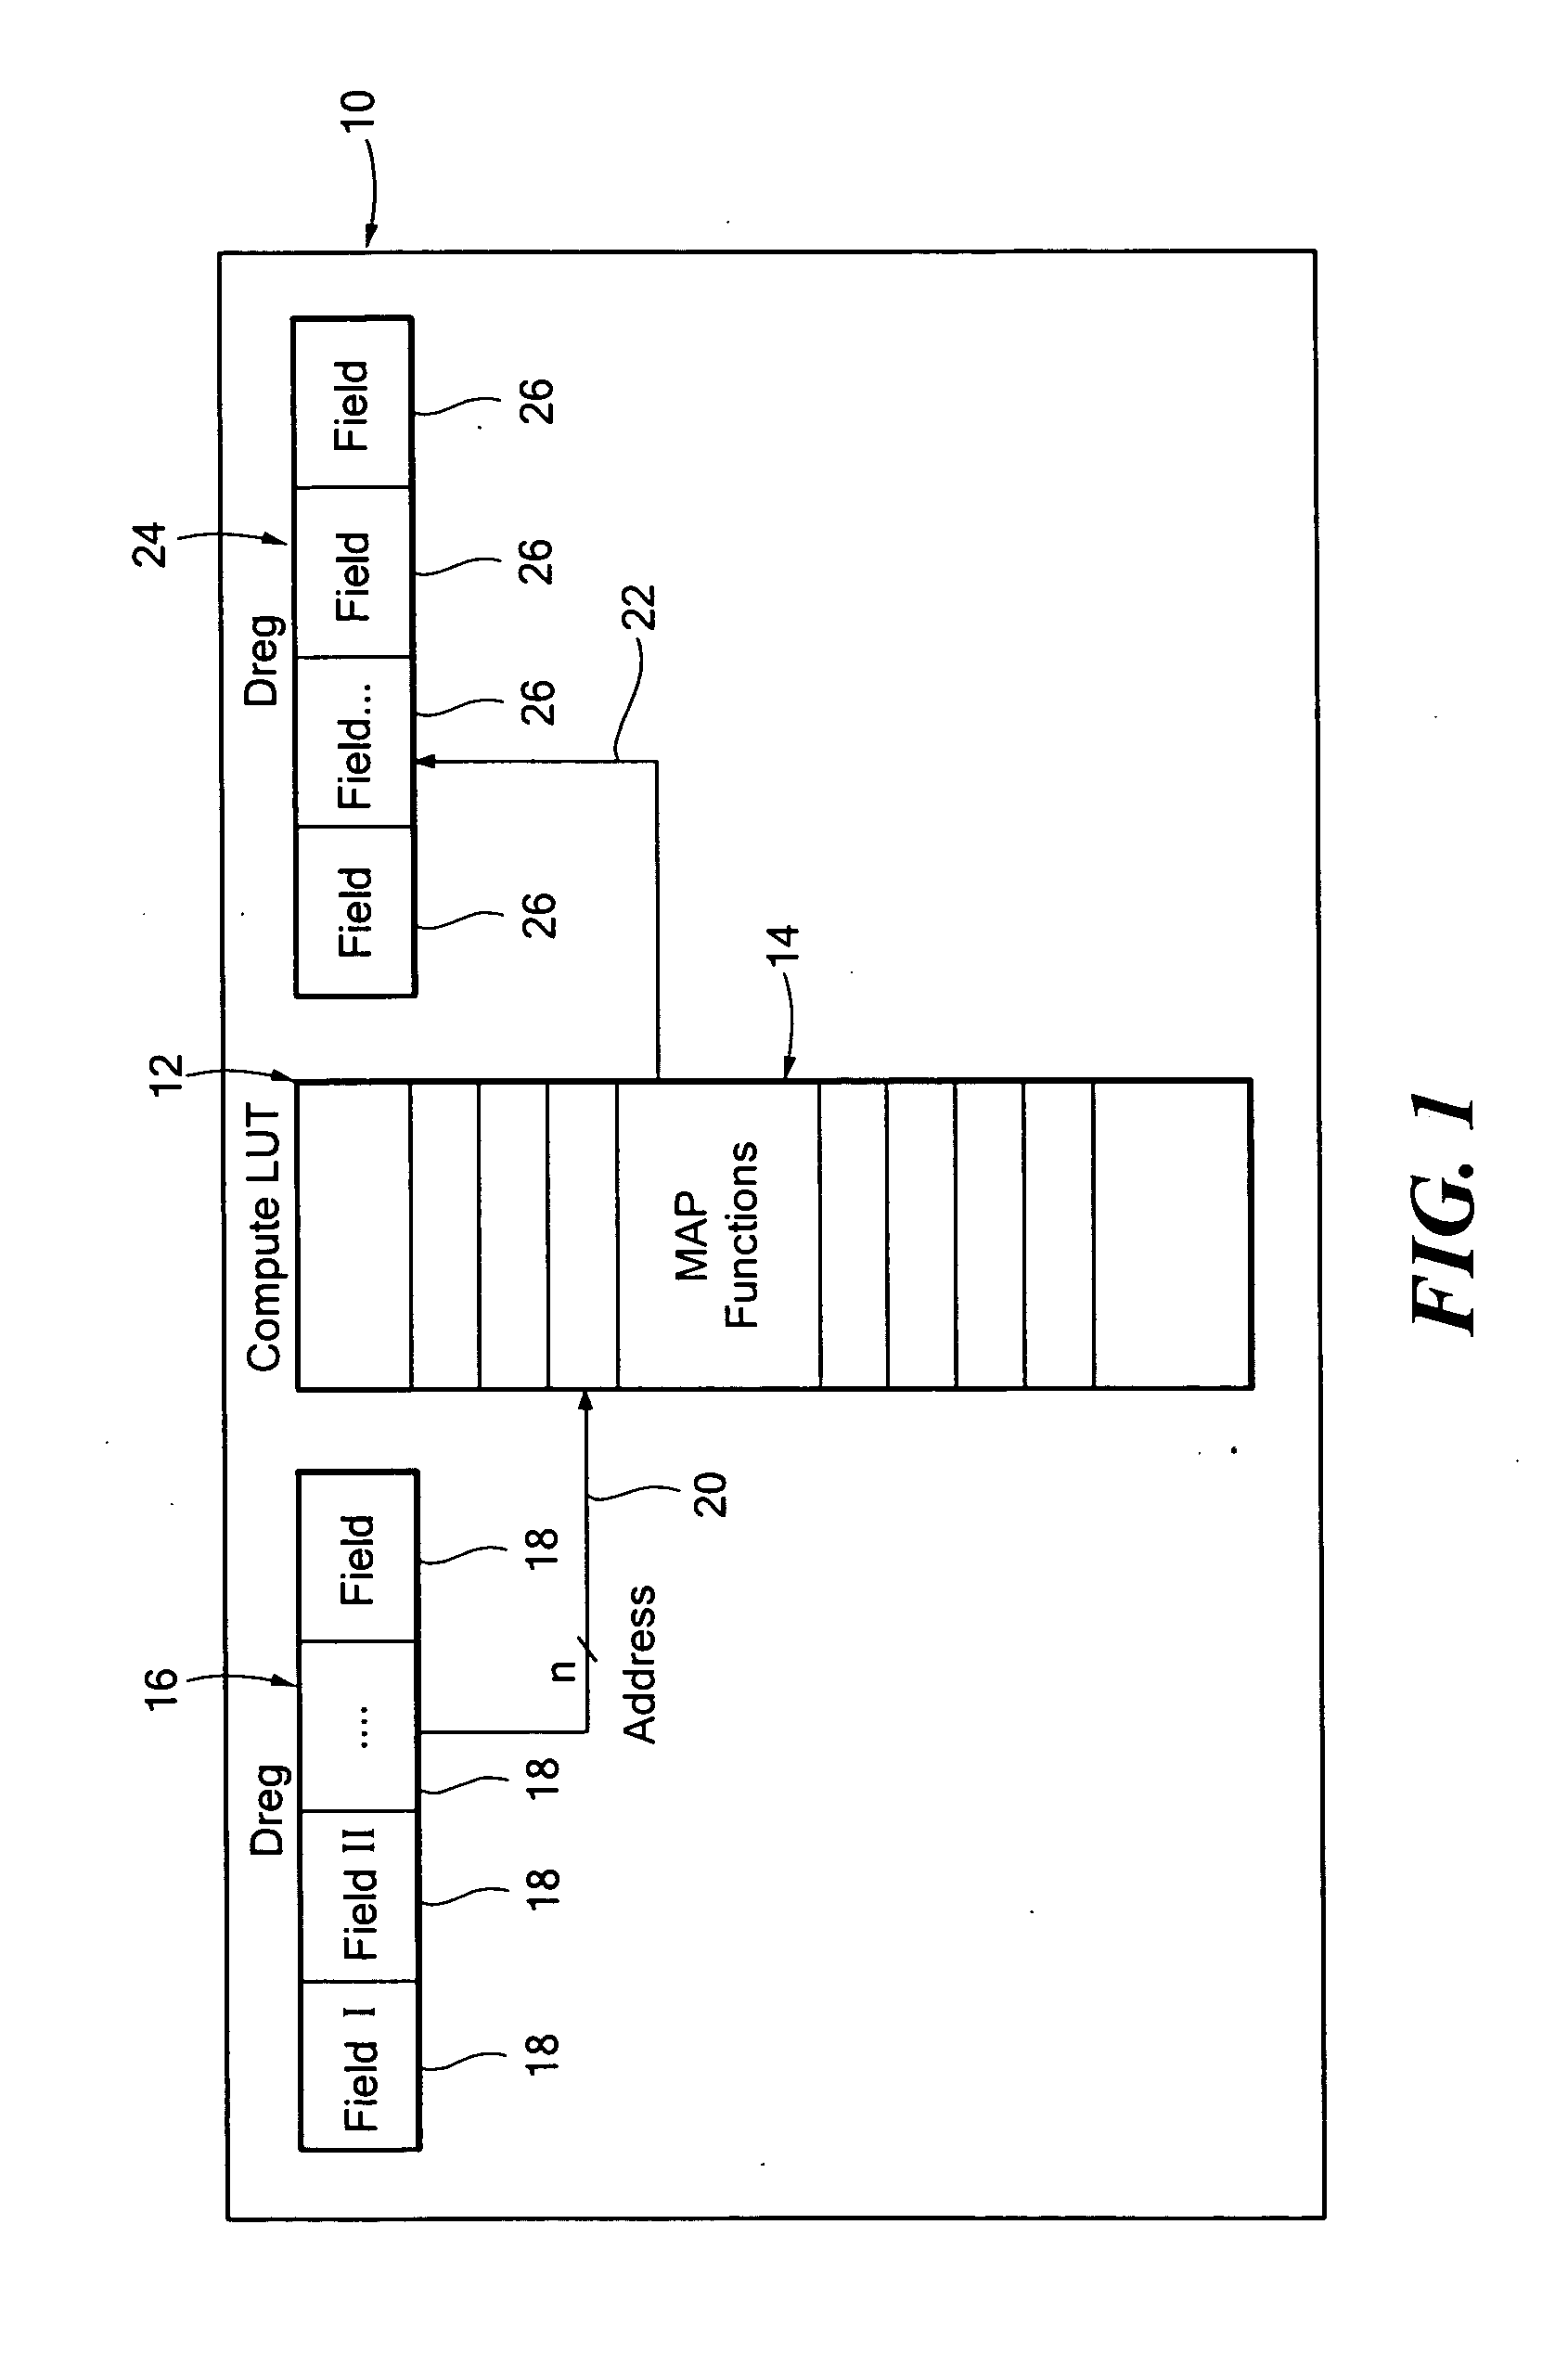 Method and apparatus for mapping the primary operational sequences of an algorithm in a compute unit having an internal random access memory